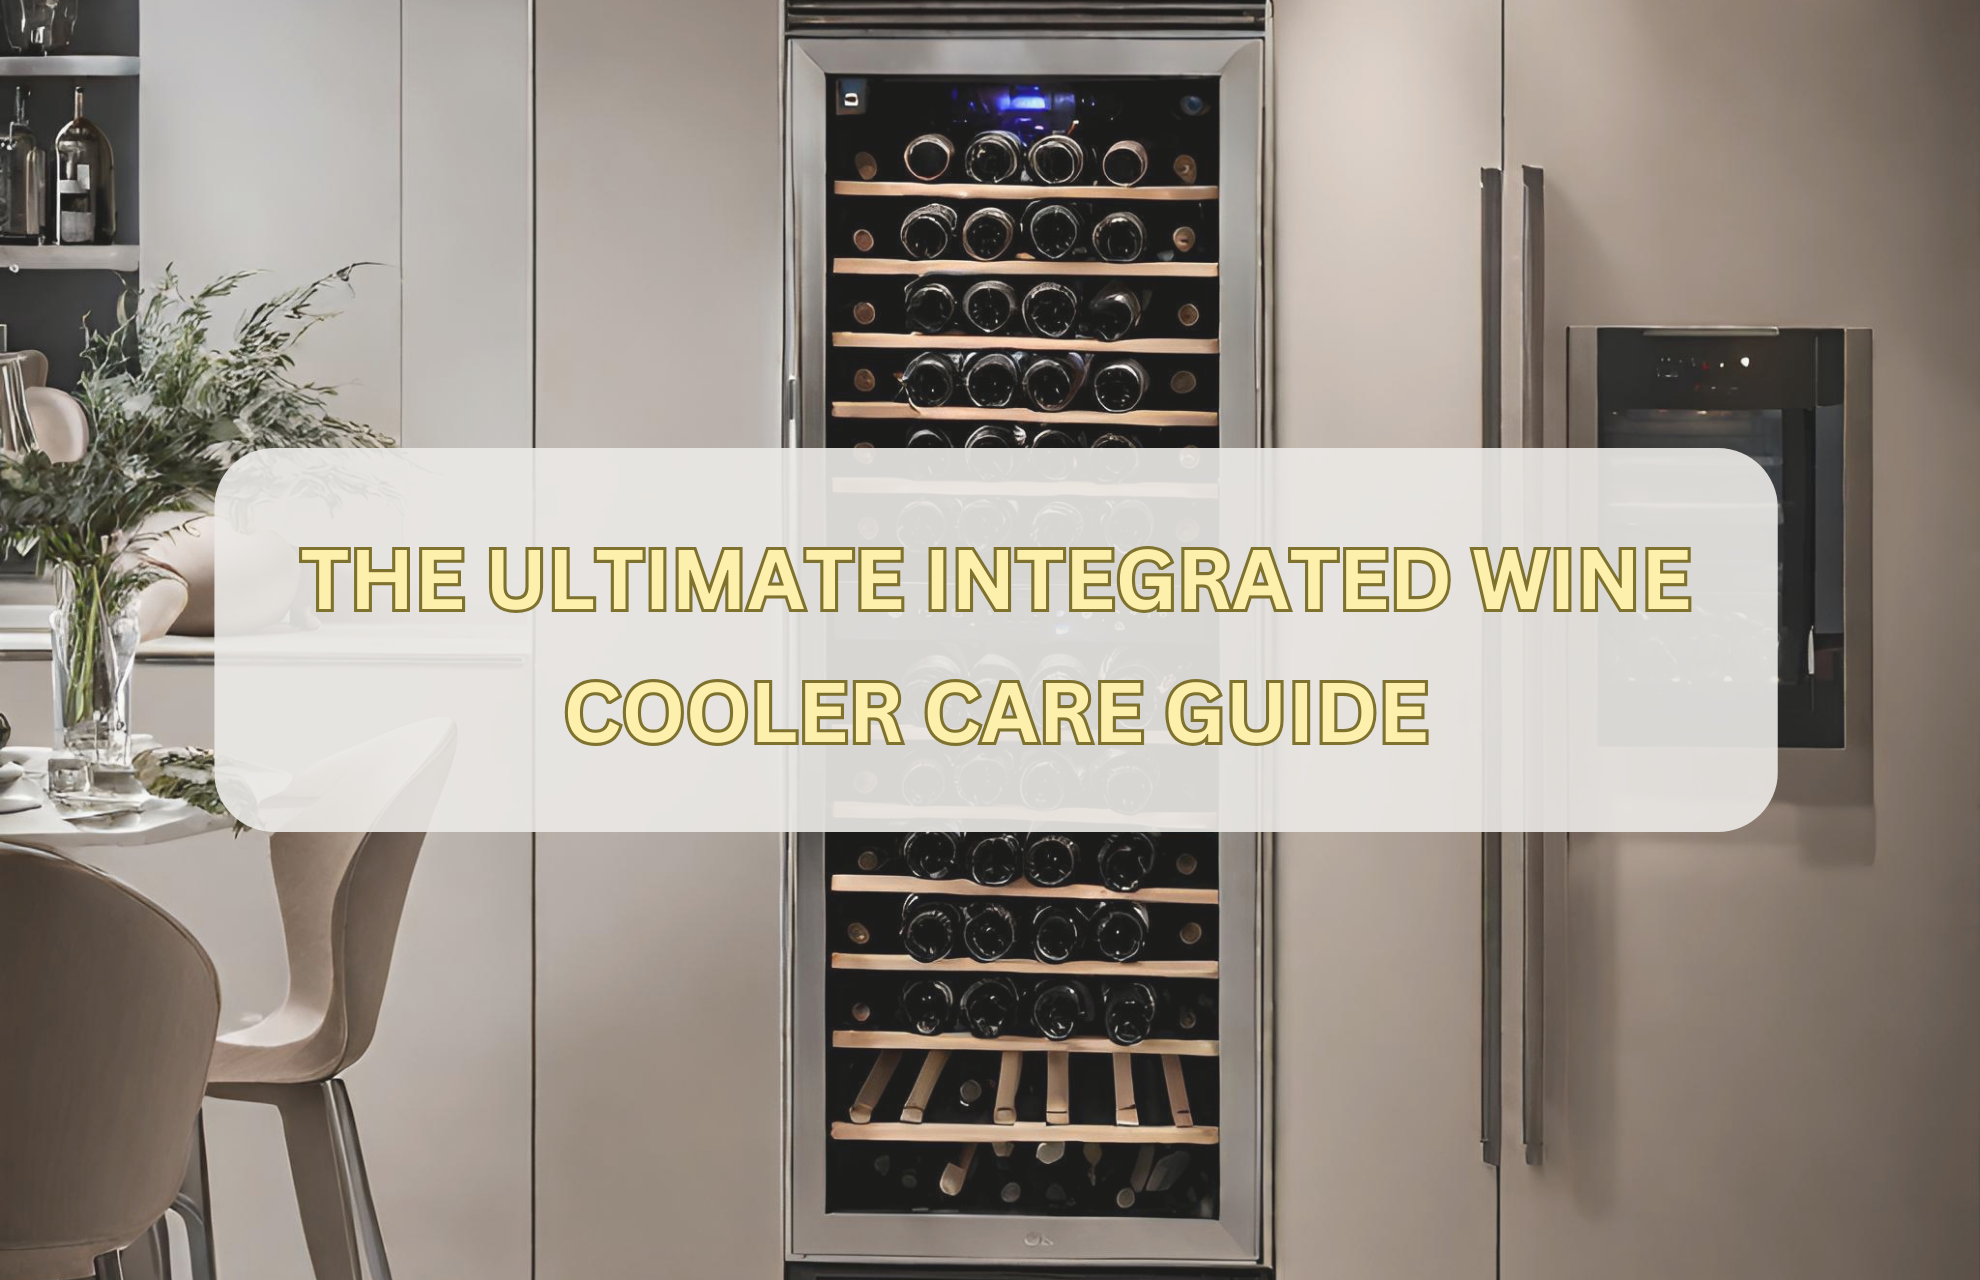 The Ultimate Integrated Wine Cooler Care Guide